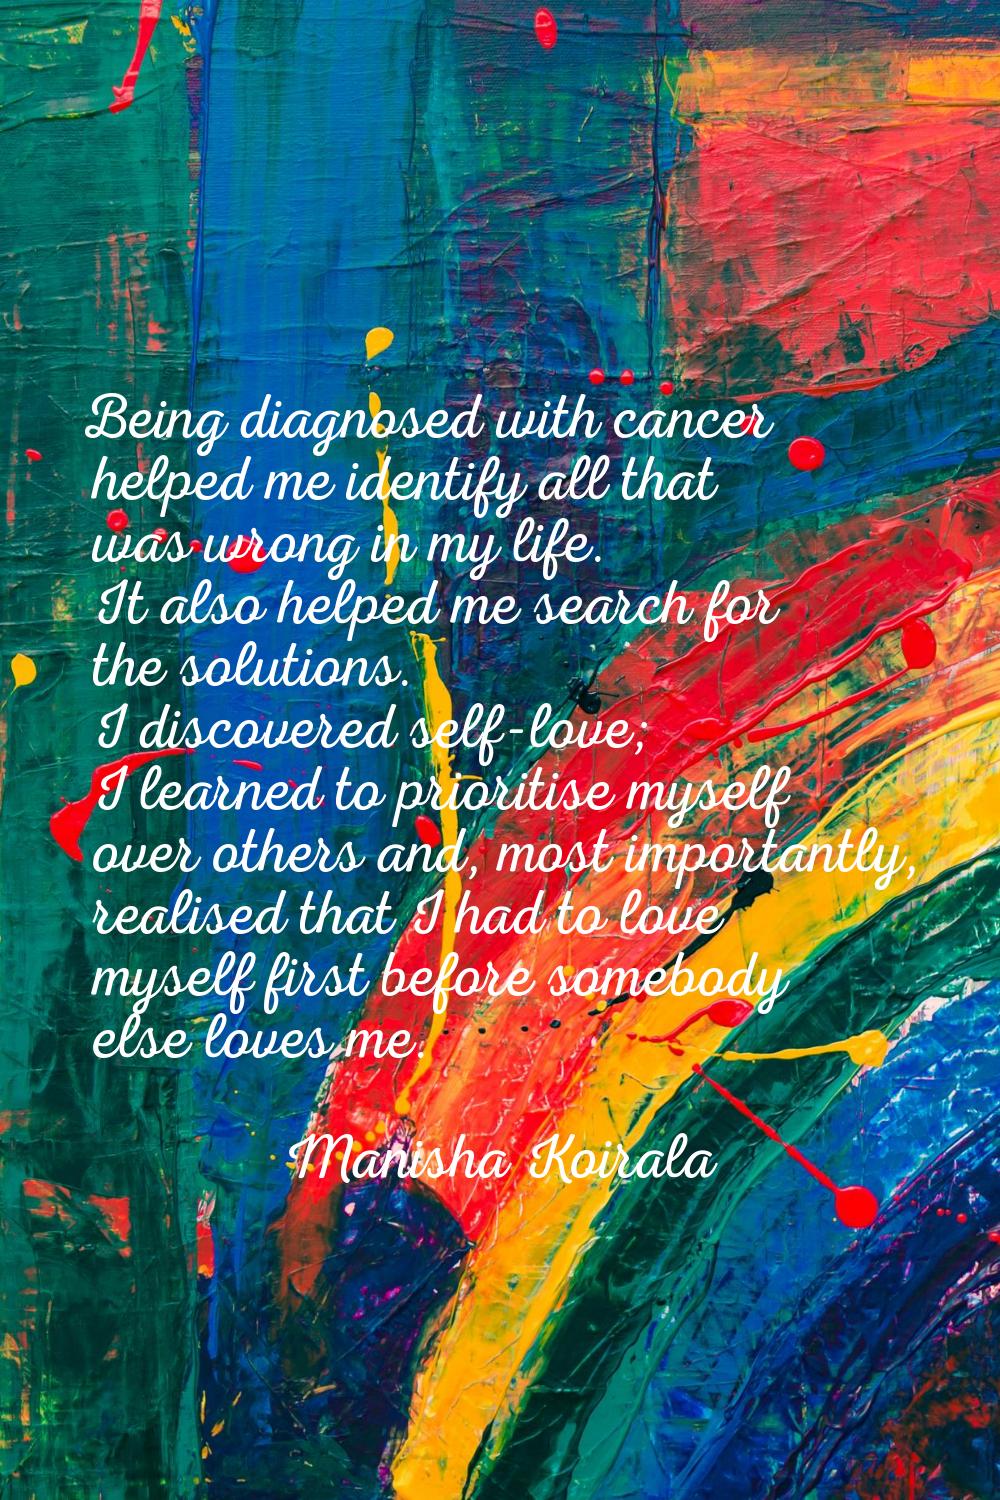 Being diagnosed with cancer helped me identify all that was wrong in my life. It also helped me sea